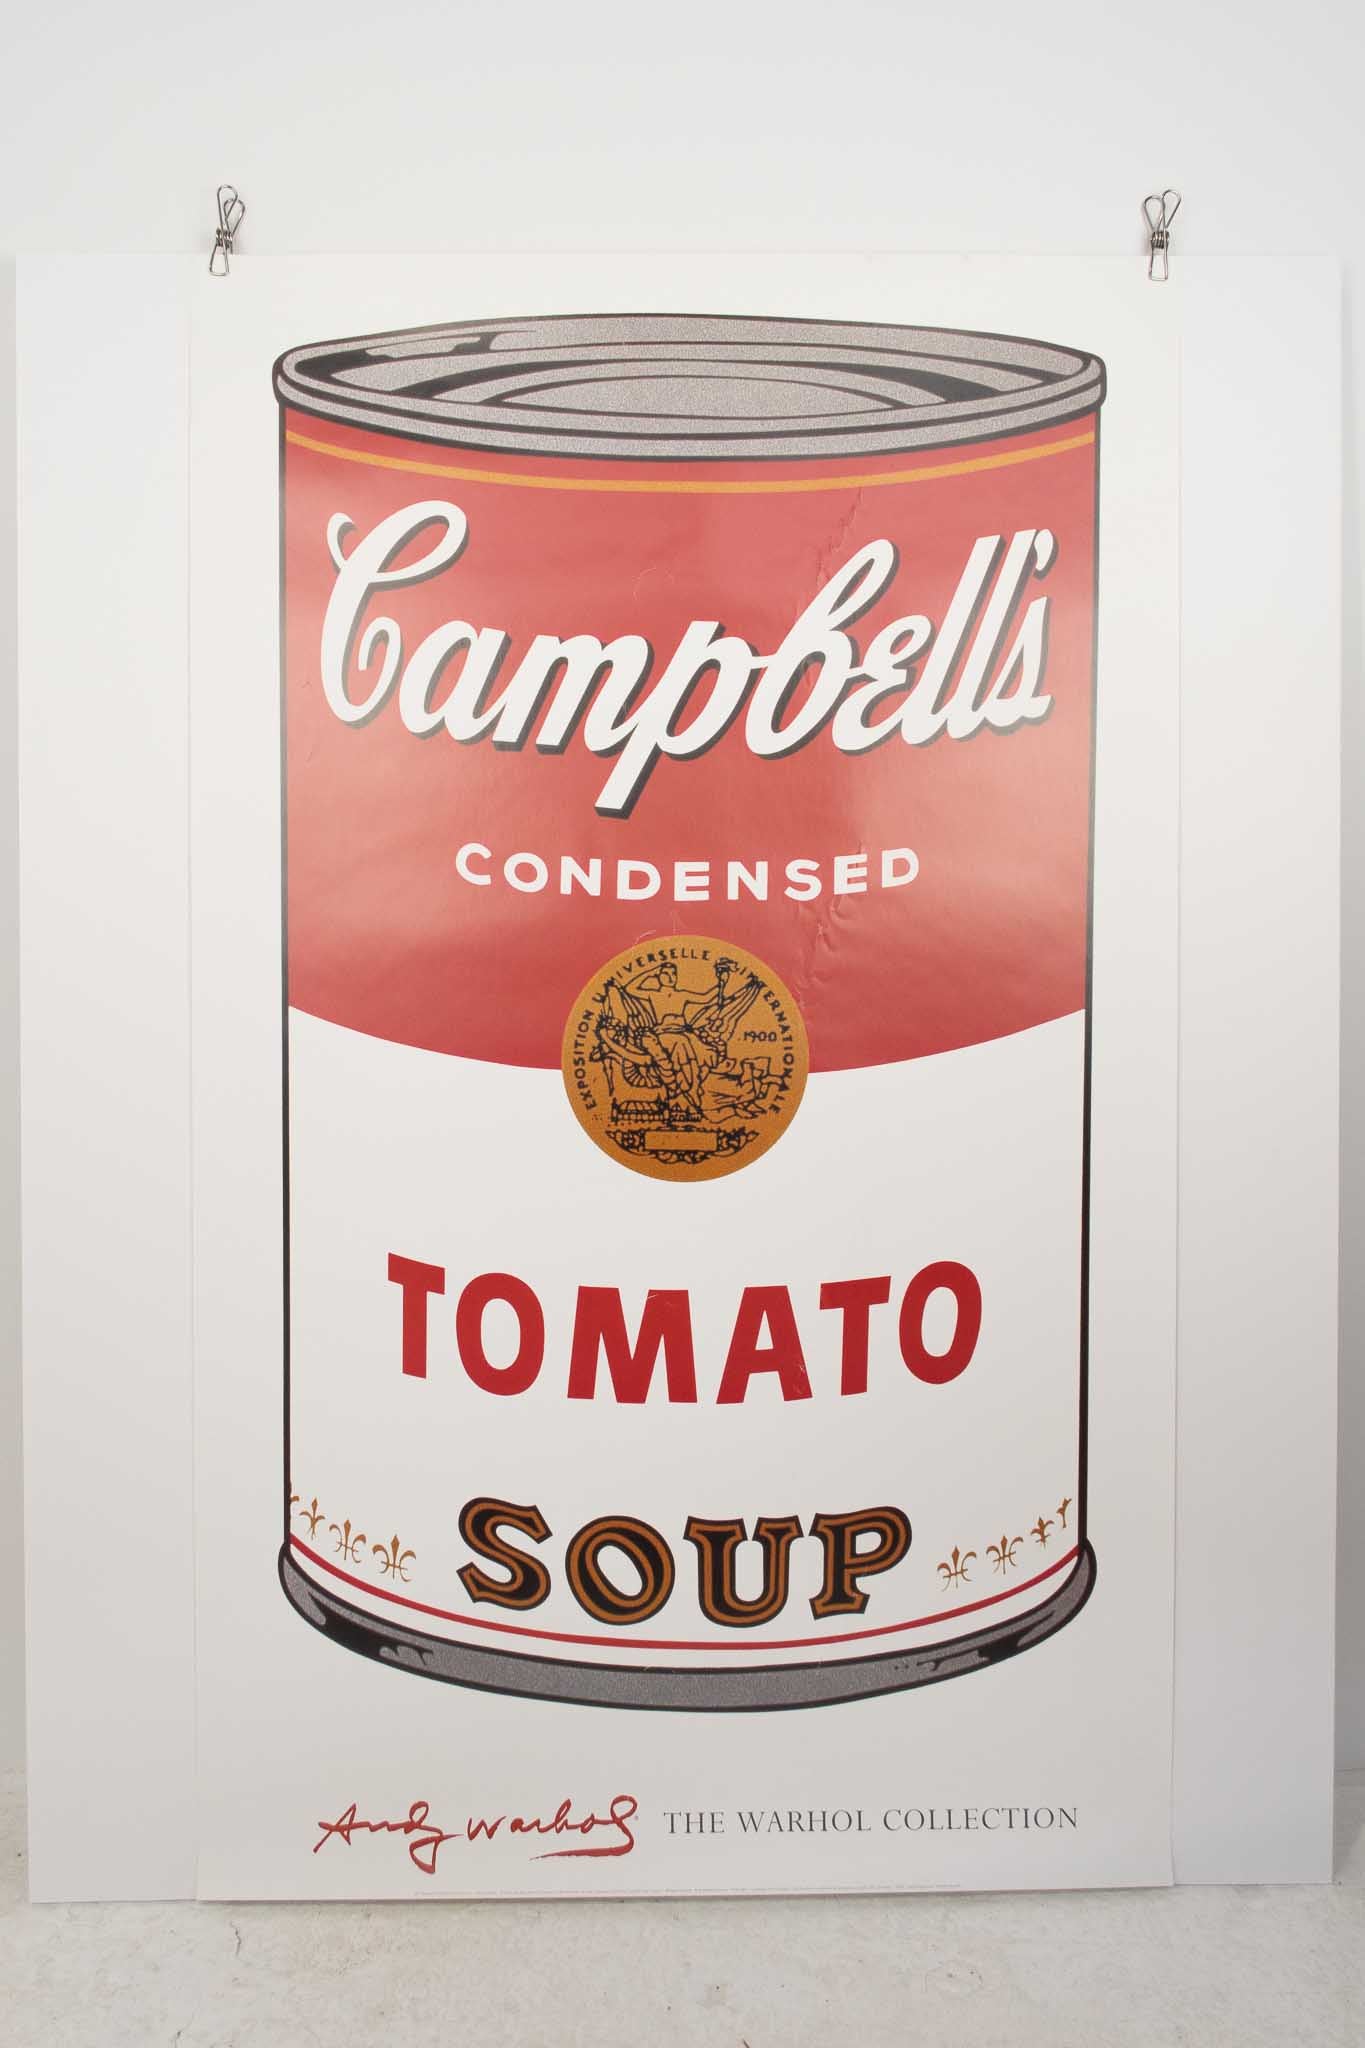 Andy Warhol "Campbell's Soup Can" Print